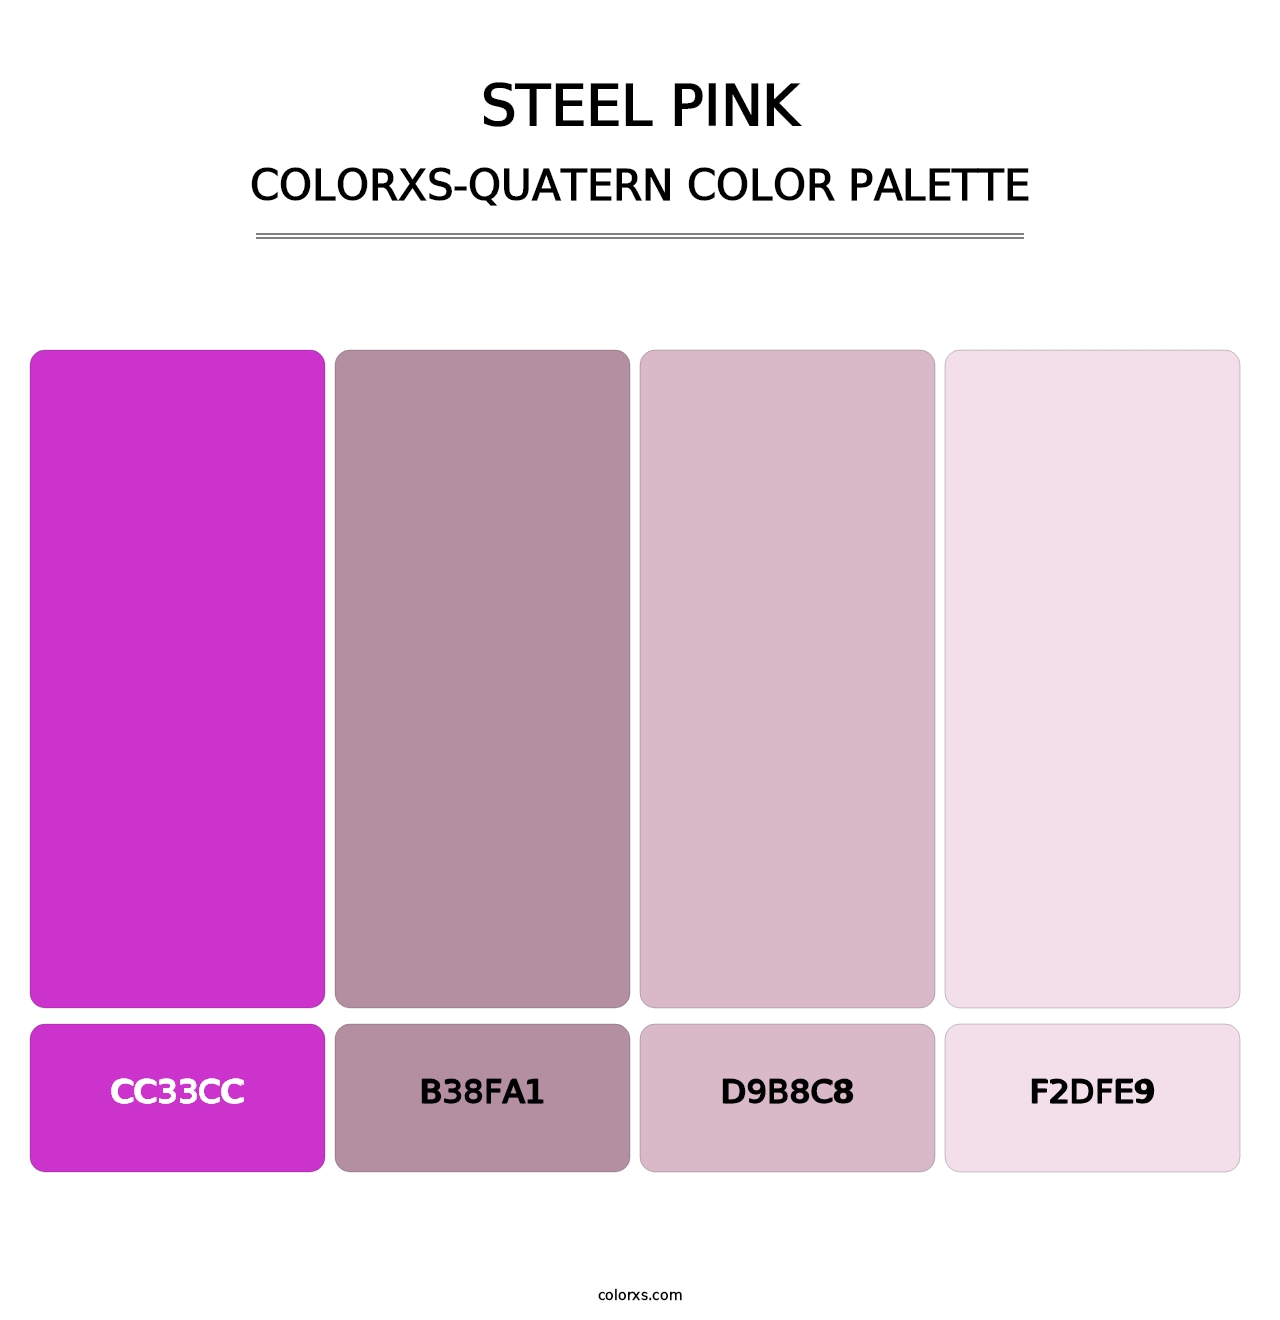 Steel Pink - Colorxs Quatern Palette